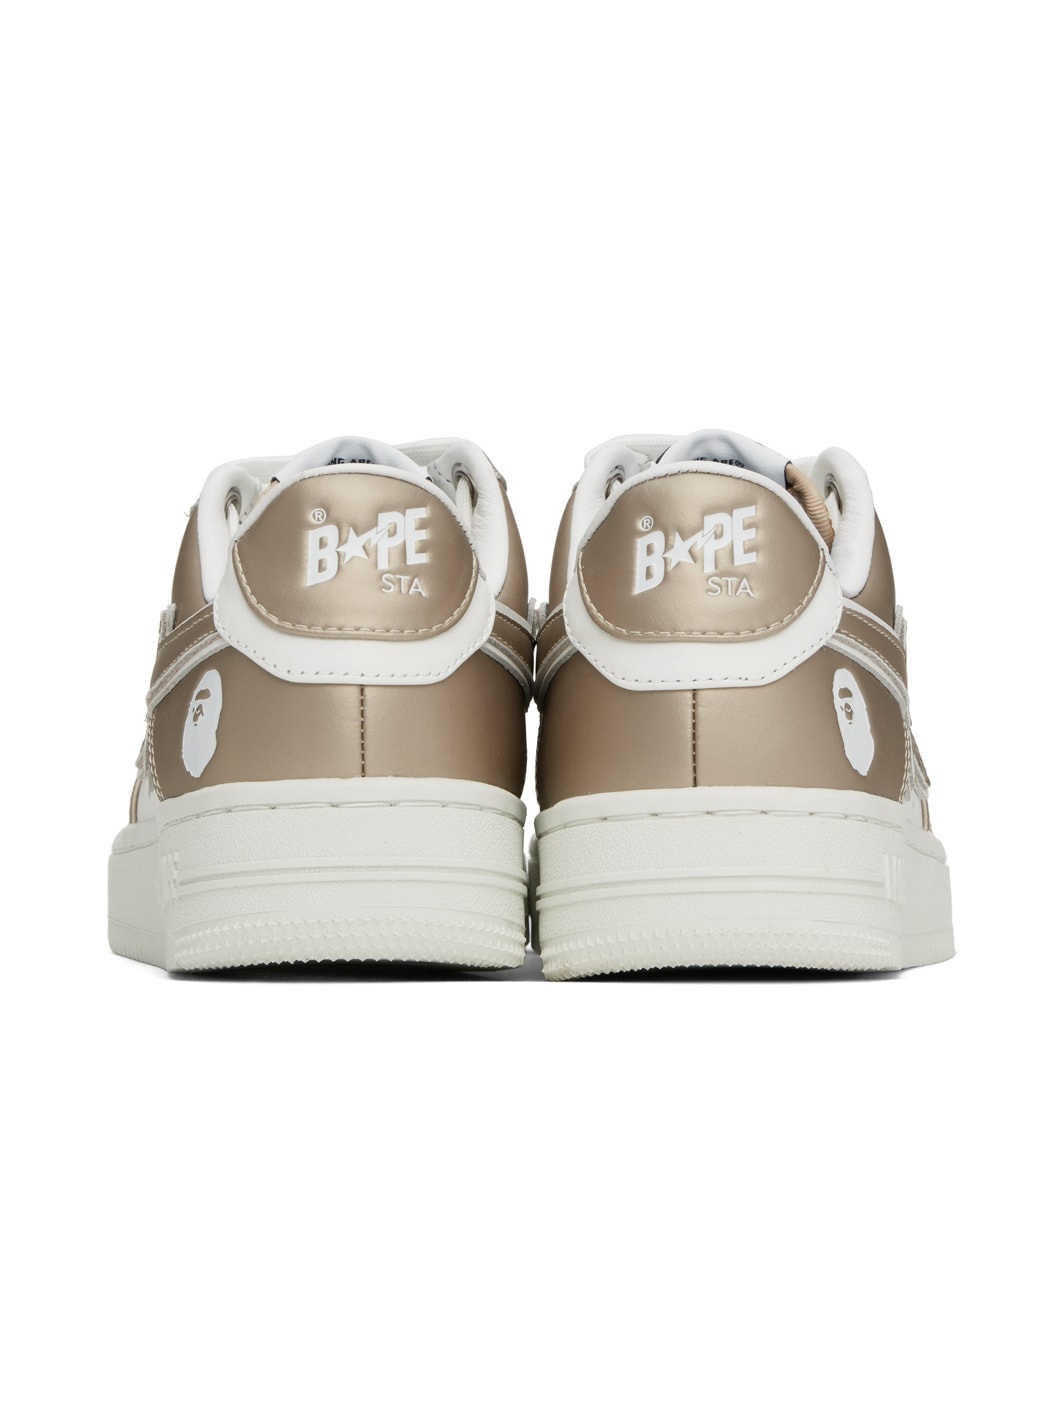 White & Gold STA #4 Sneakers - 2